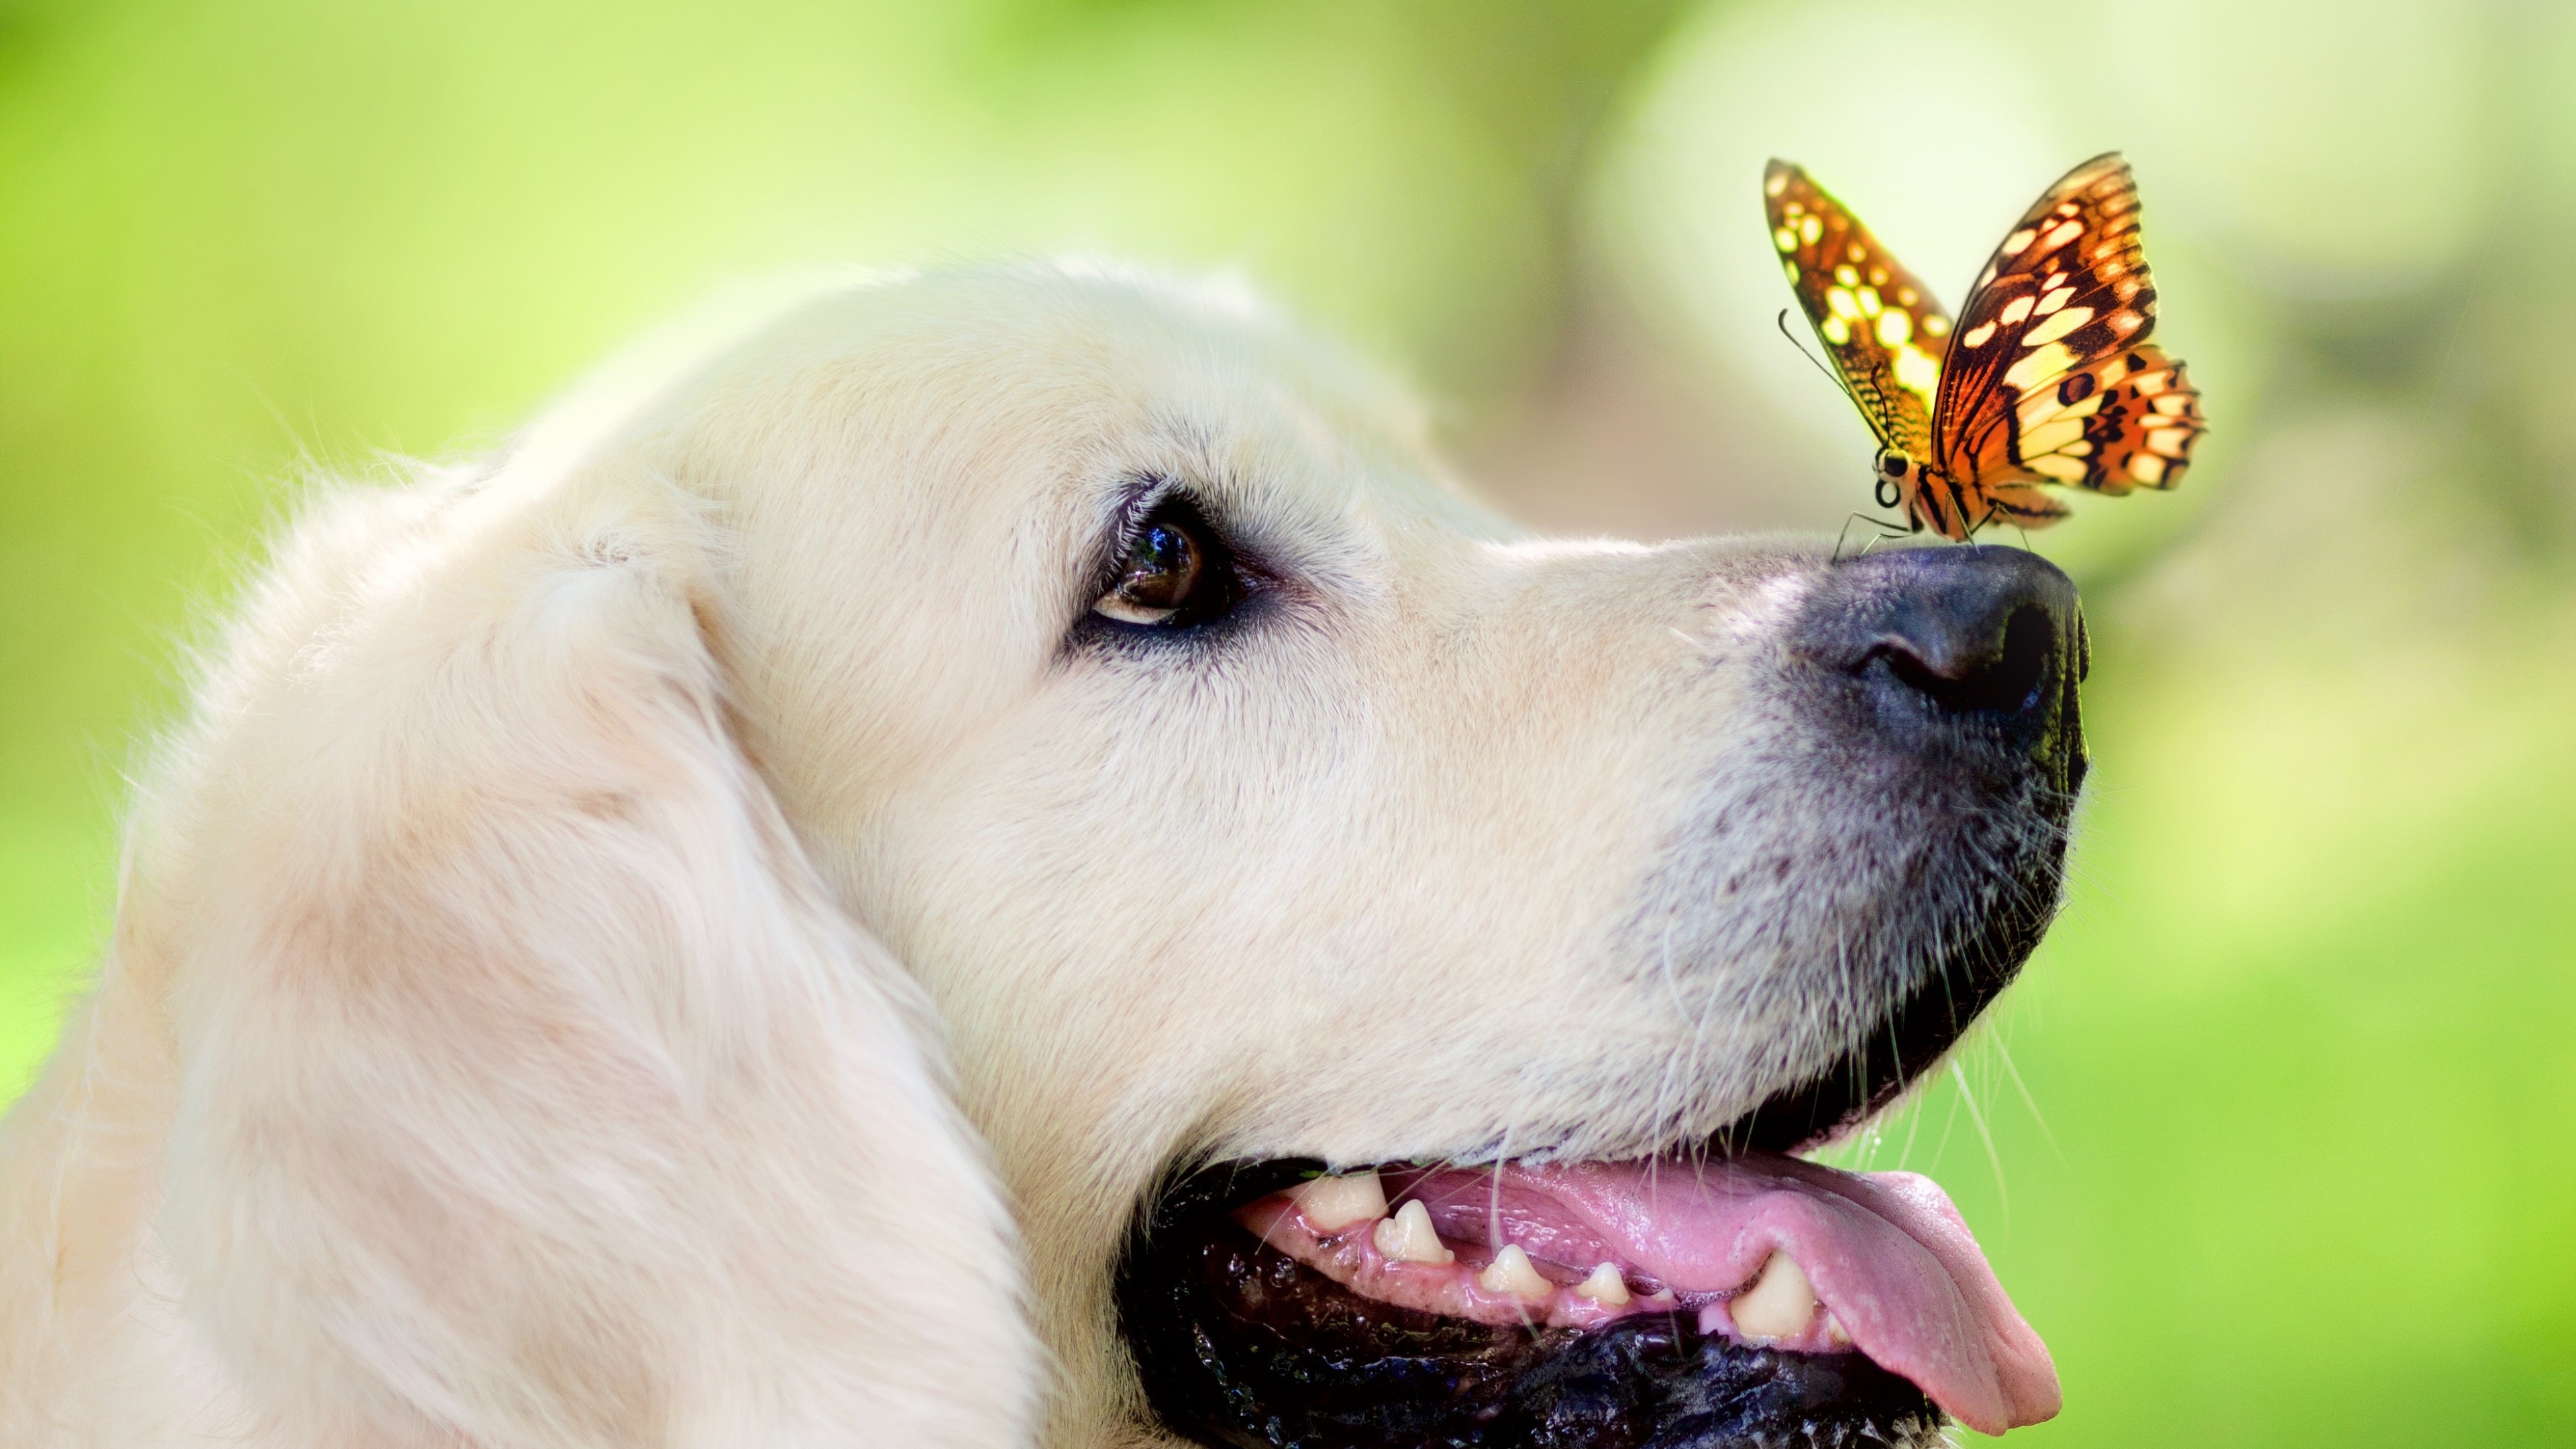  Download with Labrador Dog and Butterfly HD Wallpapers for 3840x2160